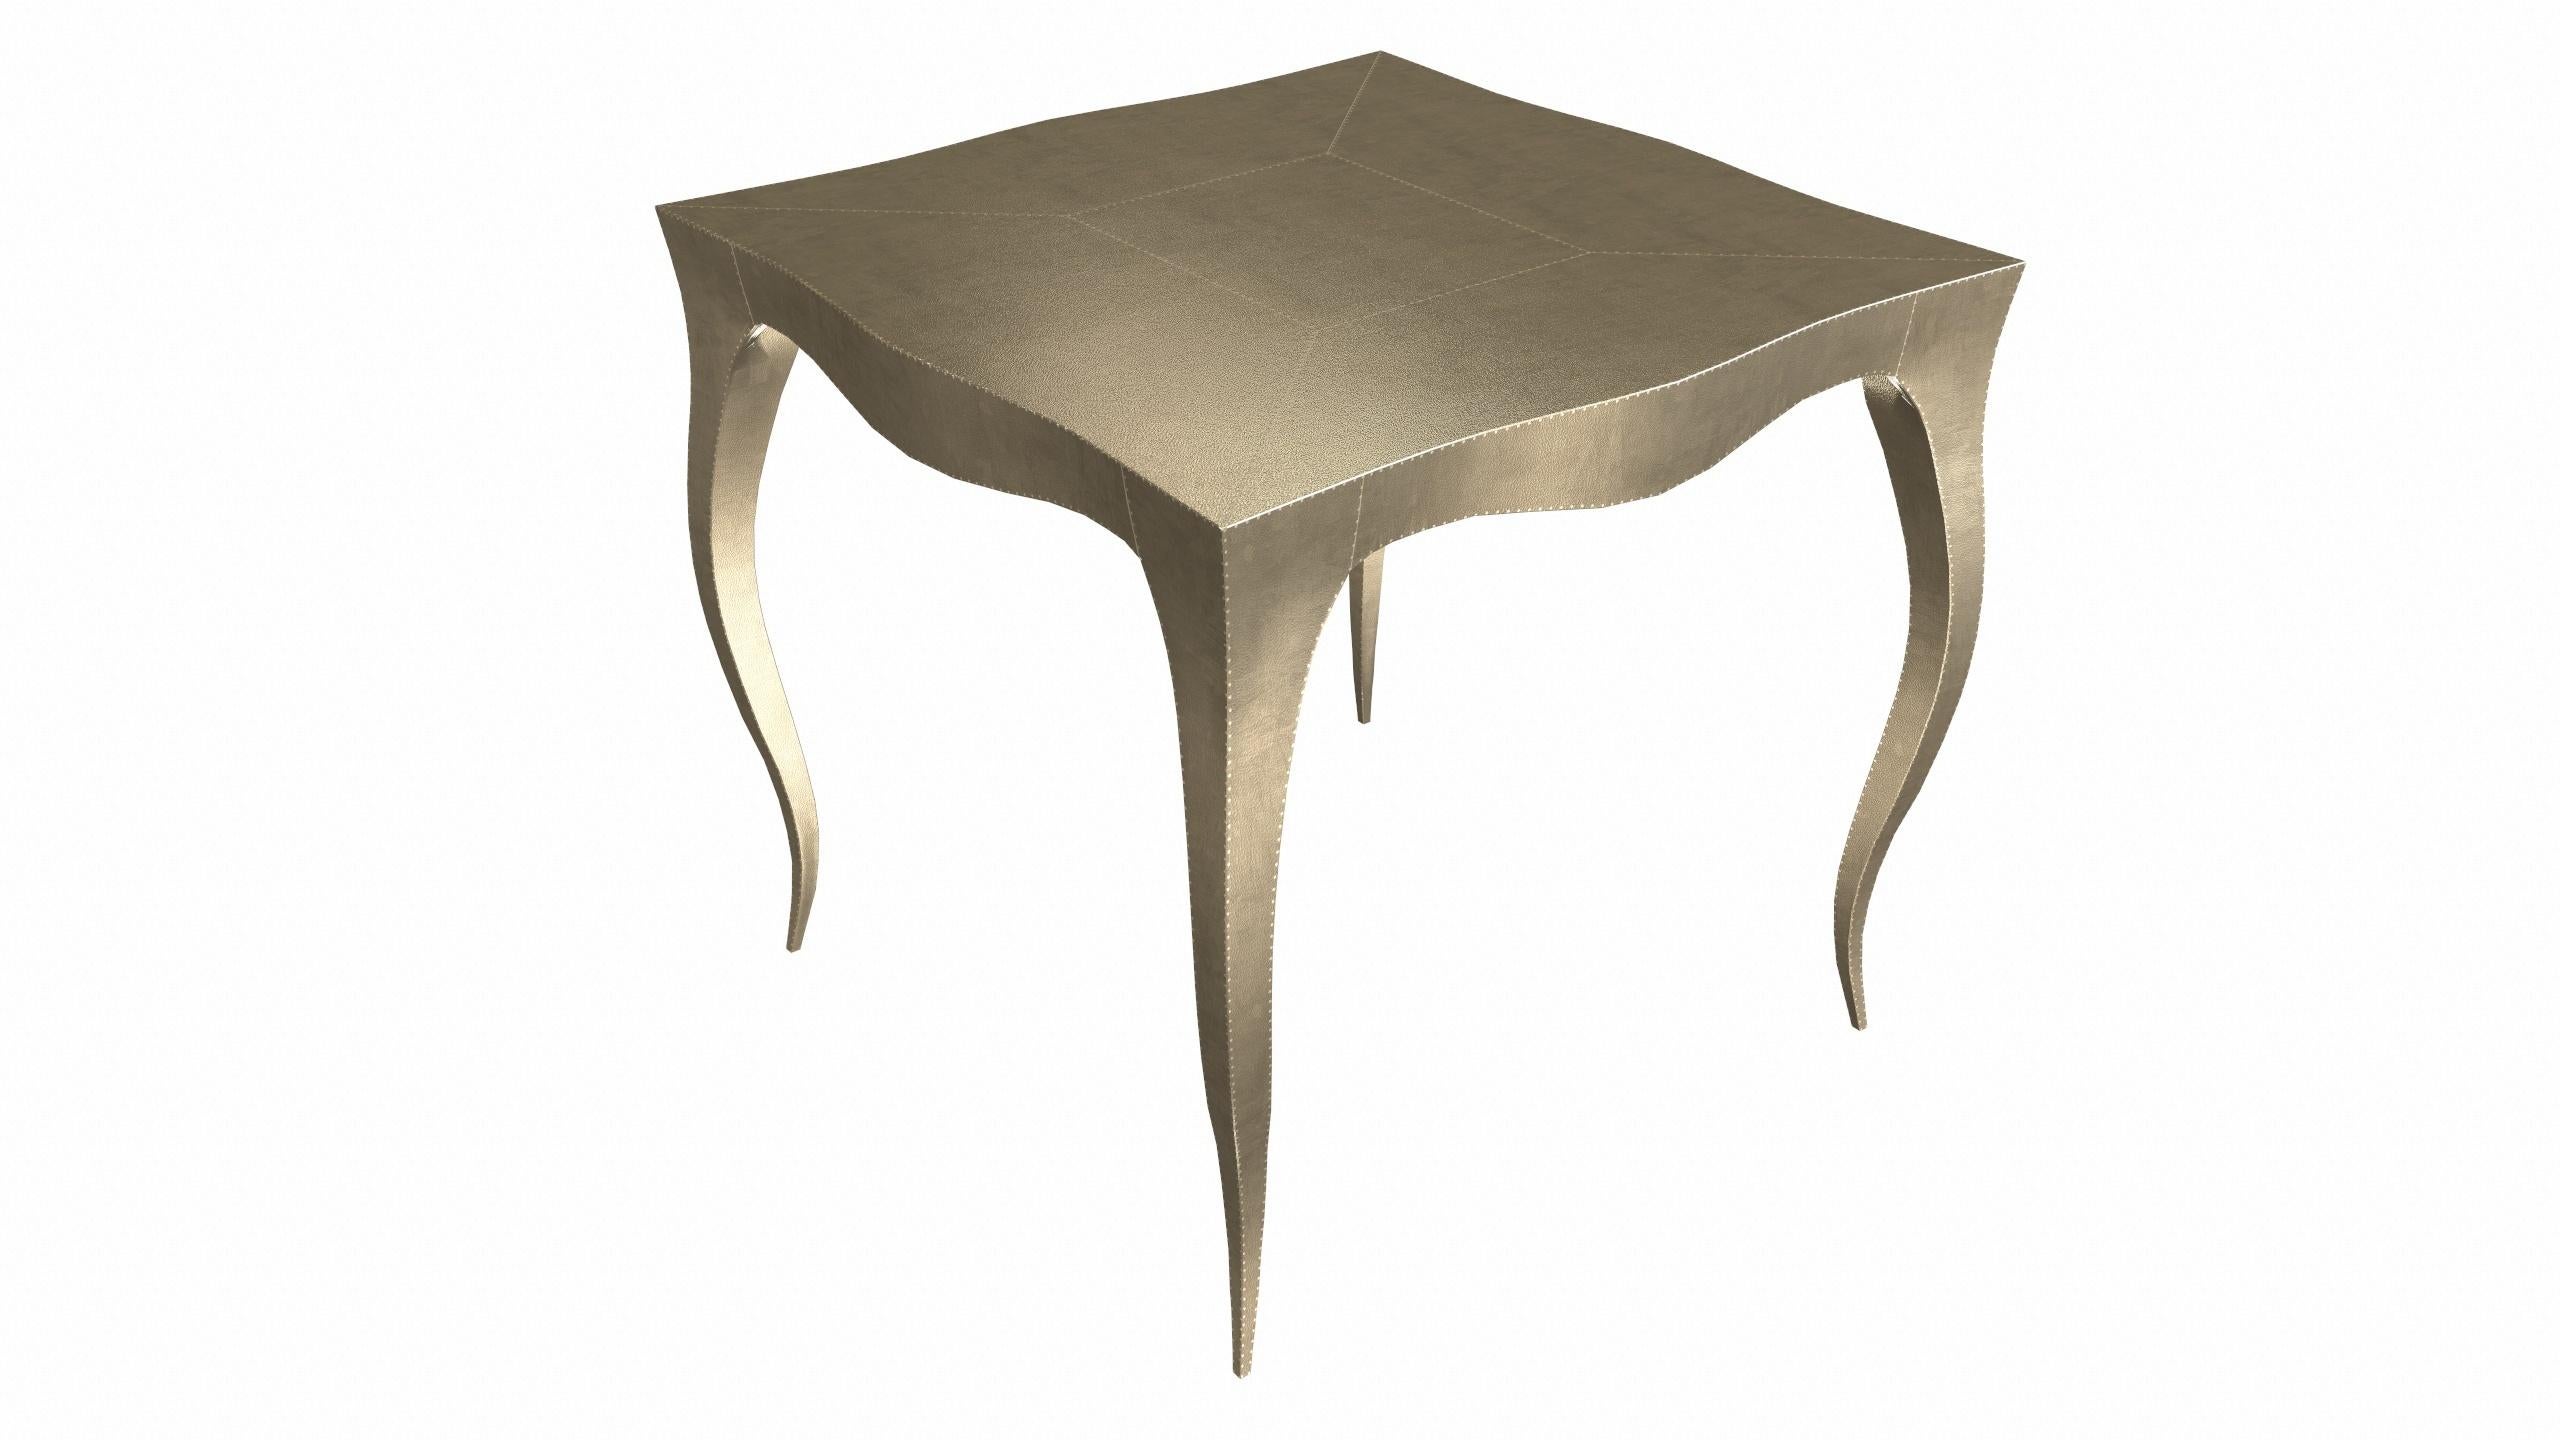 Contemporary Louise Art Deco Card Tables and Tea Tables Fine Hammered Copper by Paul Mathieu For Sale